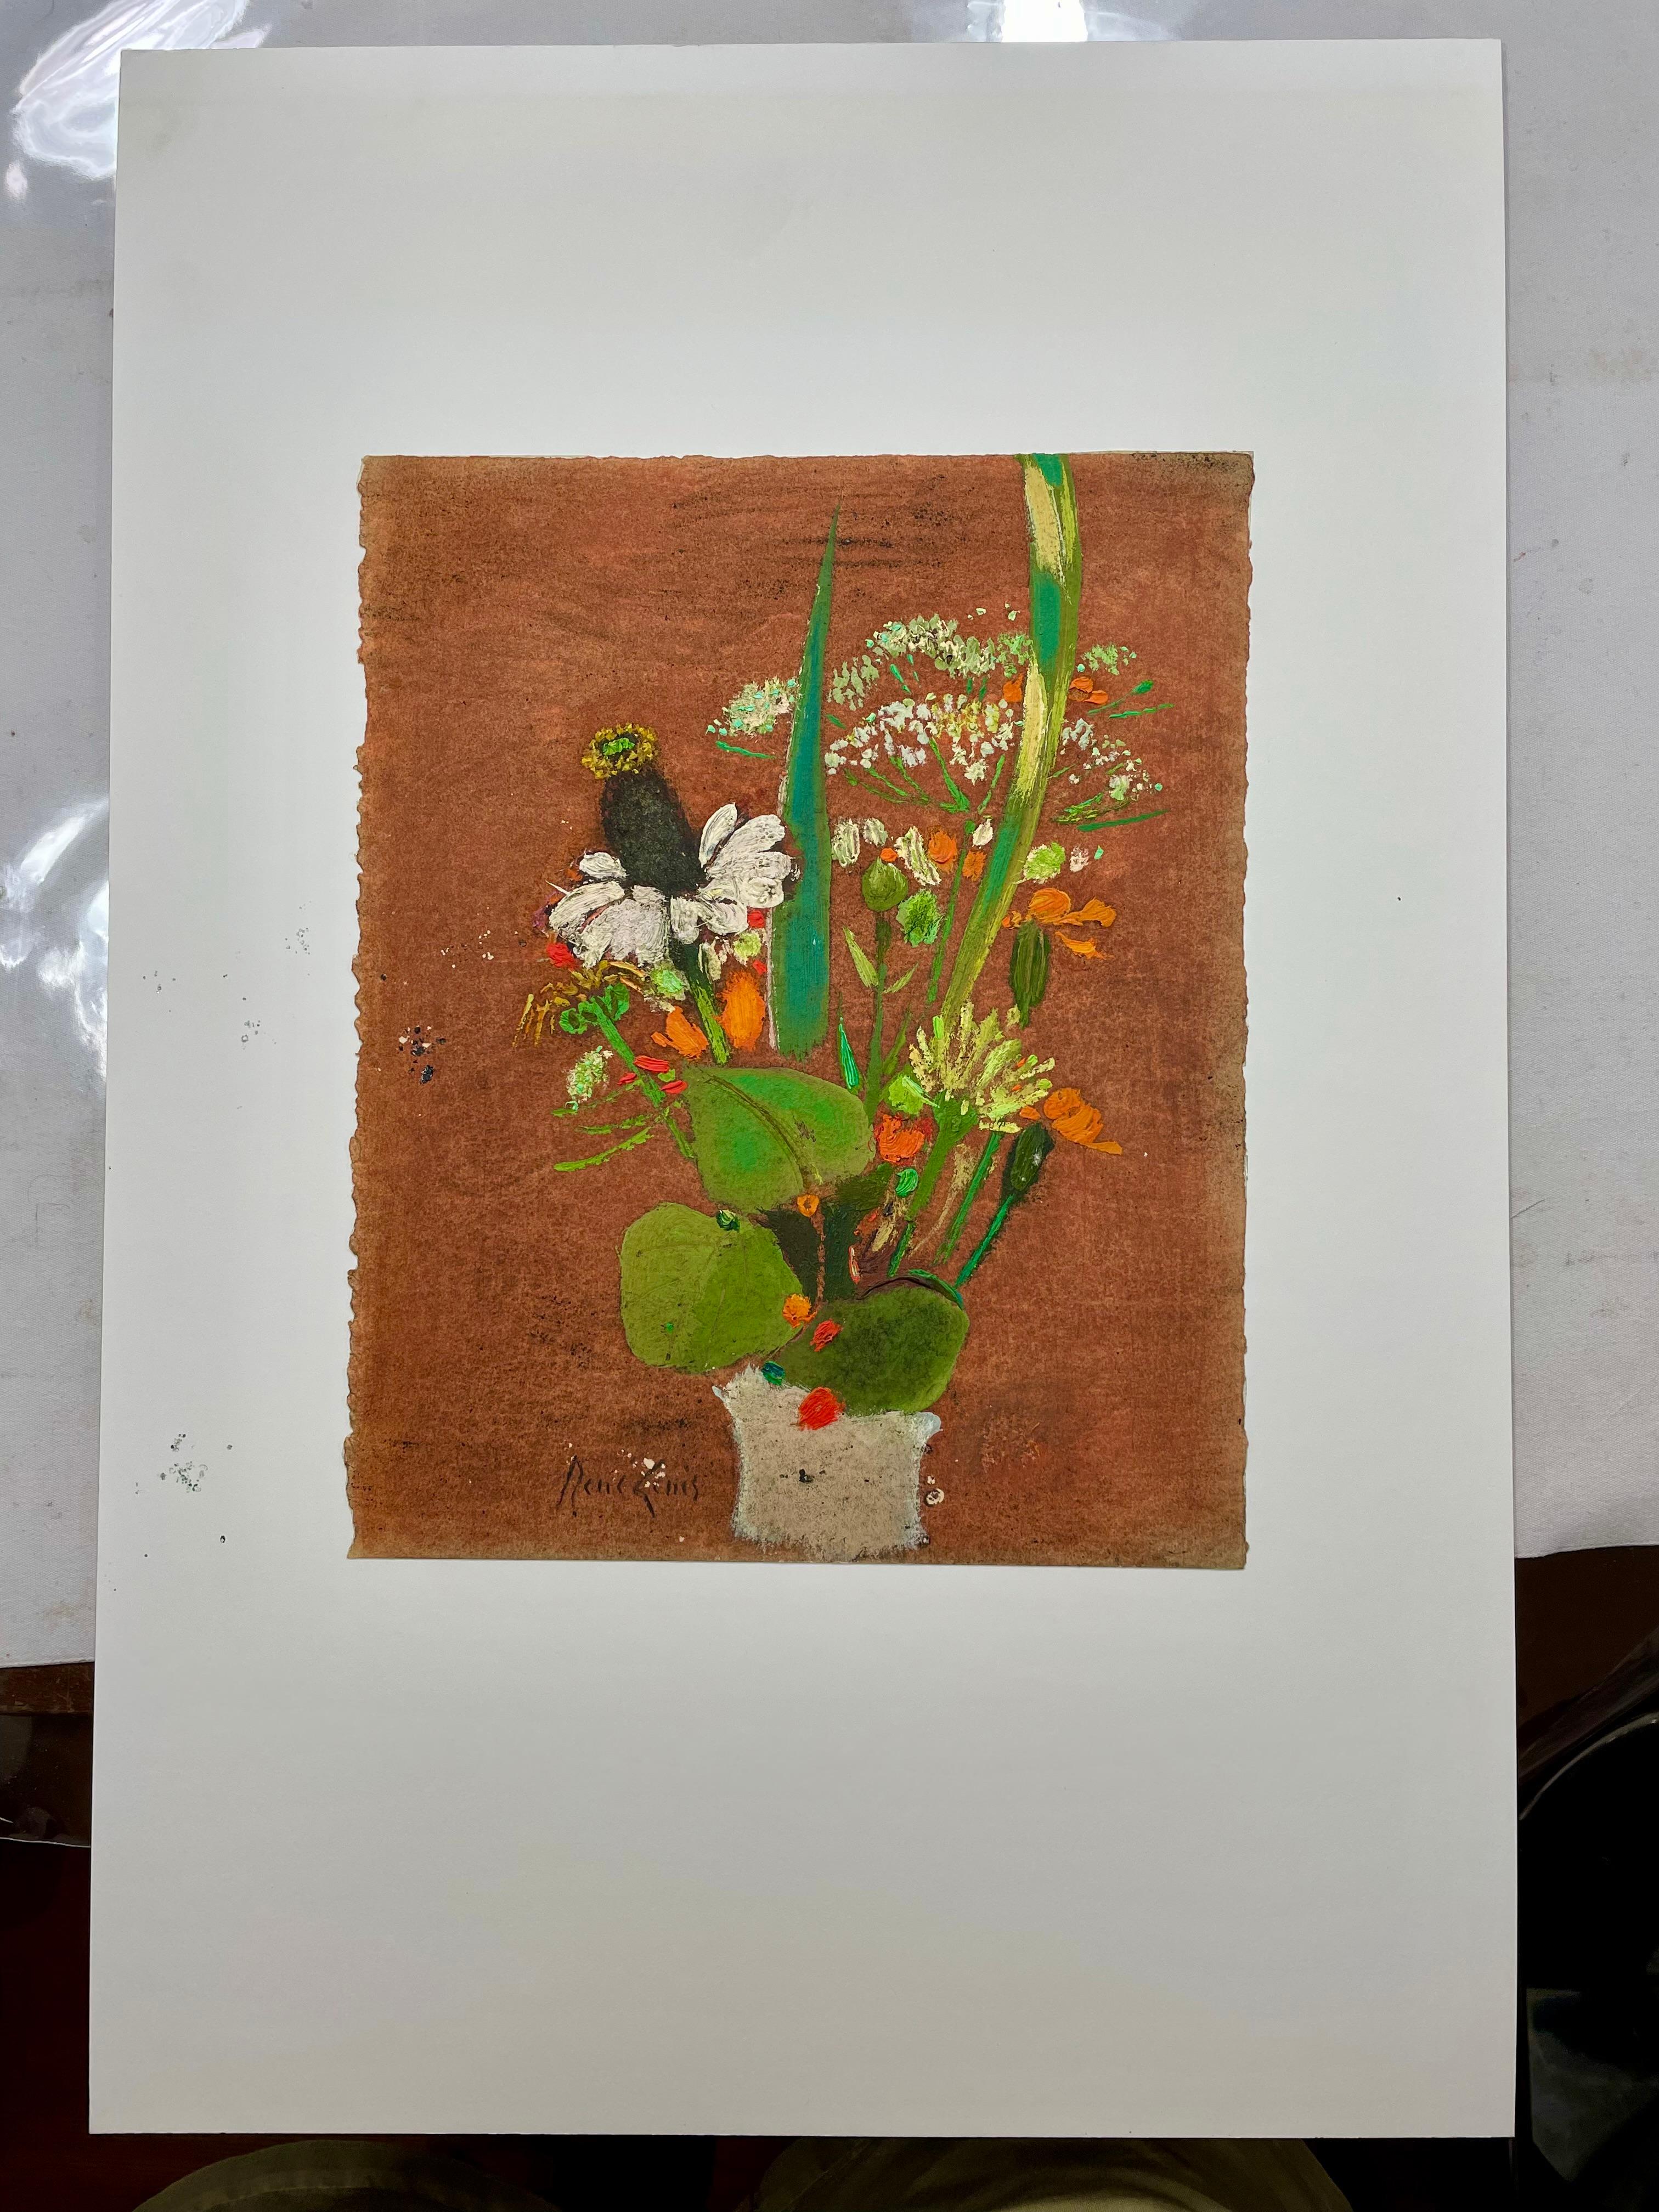 “bouquet au fons rouille” / bouquet with rusty frons - Painting by René Genis